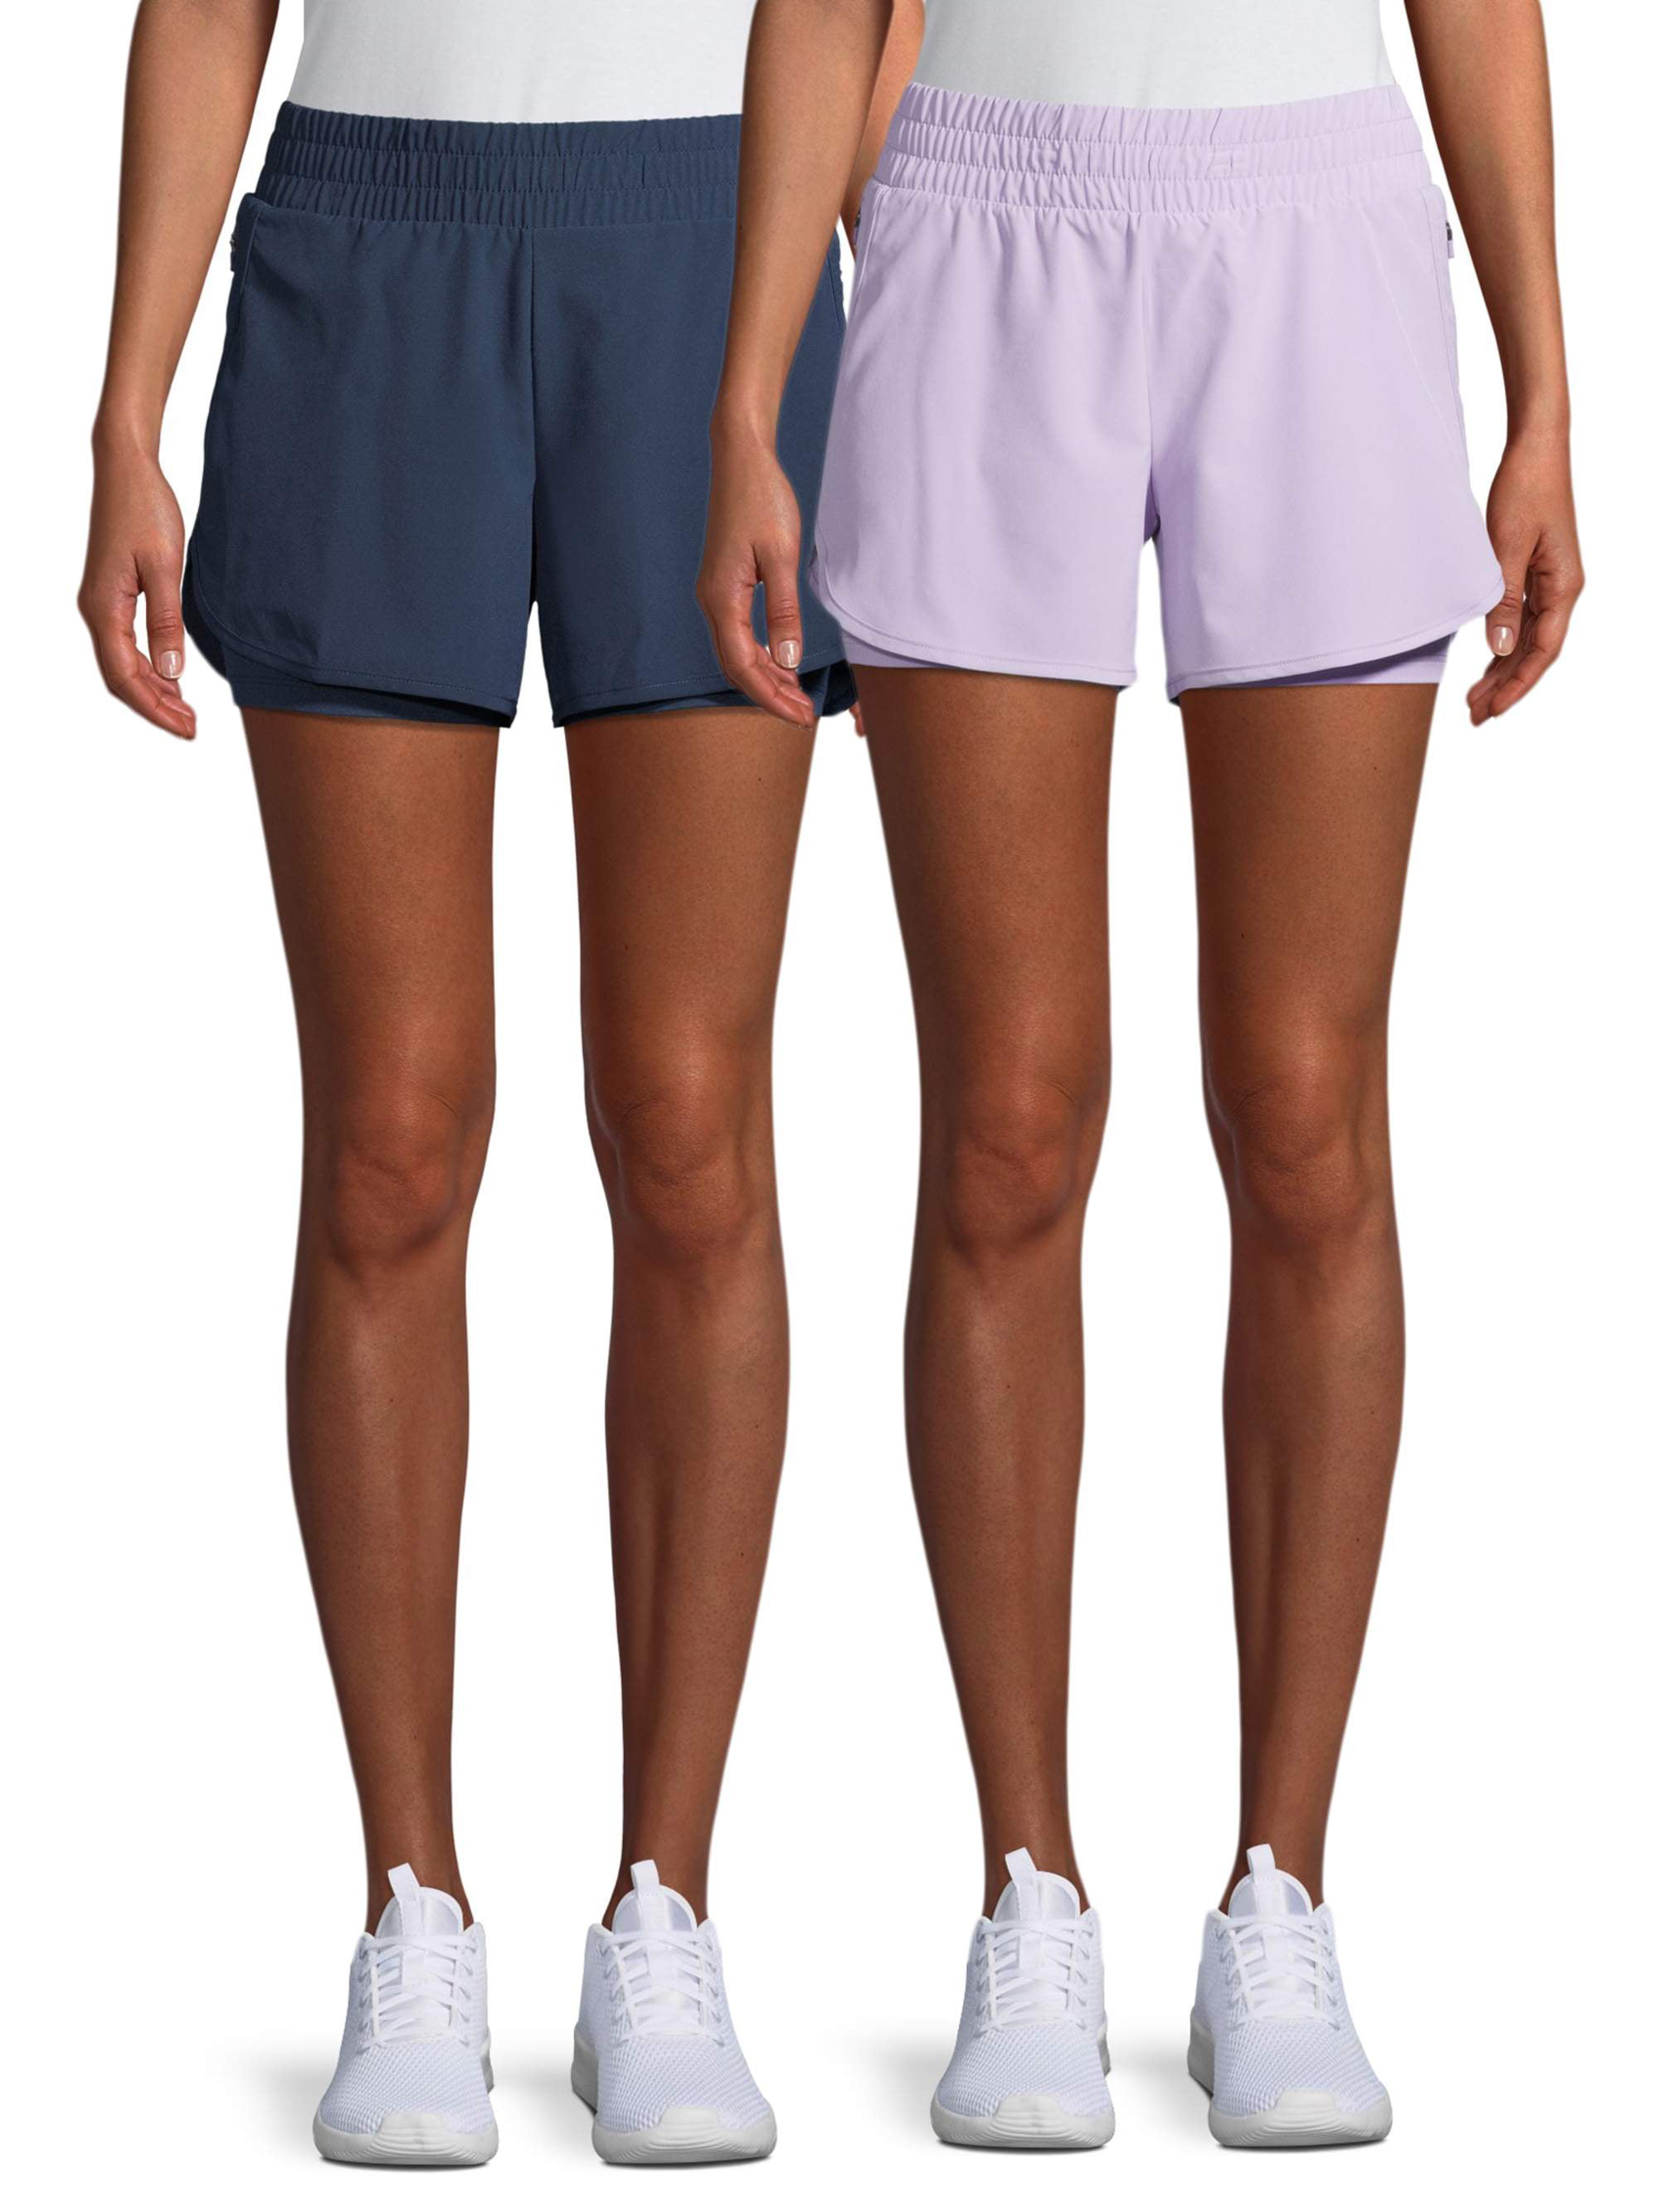 Athletic Works Women's Performance Running Shorts, 2 Pack 